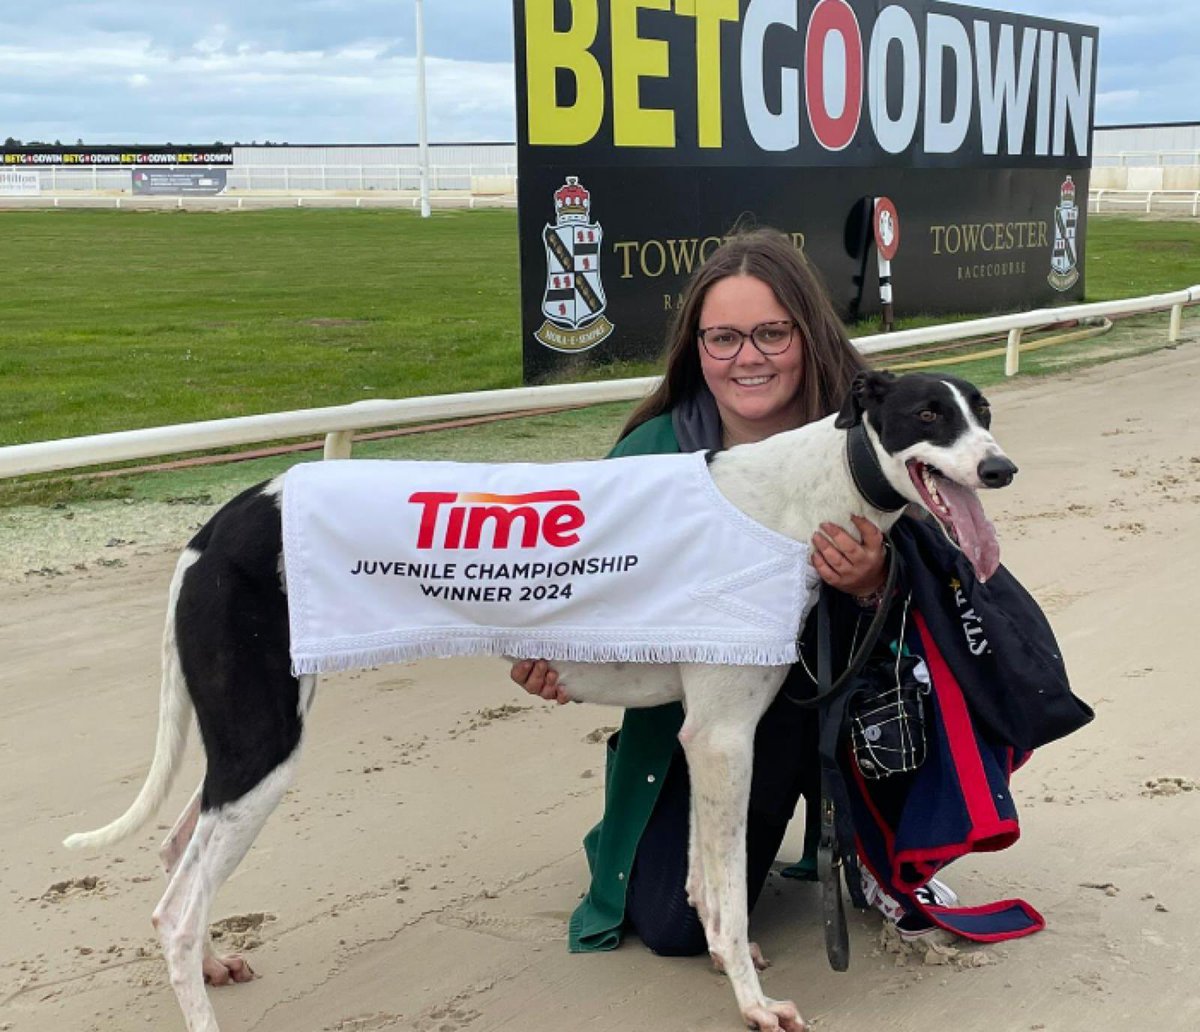 Reports round-up: bit.ly/3tJ2TNg Full stories in a busy Racing Post on Monday. @RacingPost @RPGreyhounds @TowcesterRaces @LimkGreyhound @BarkingBuzz @GRIgreyhoundsSK